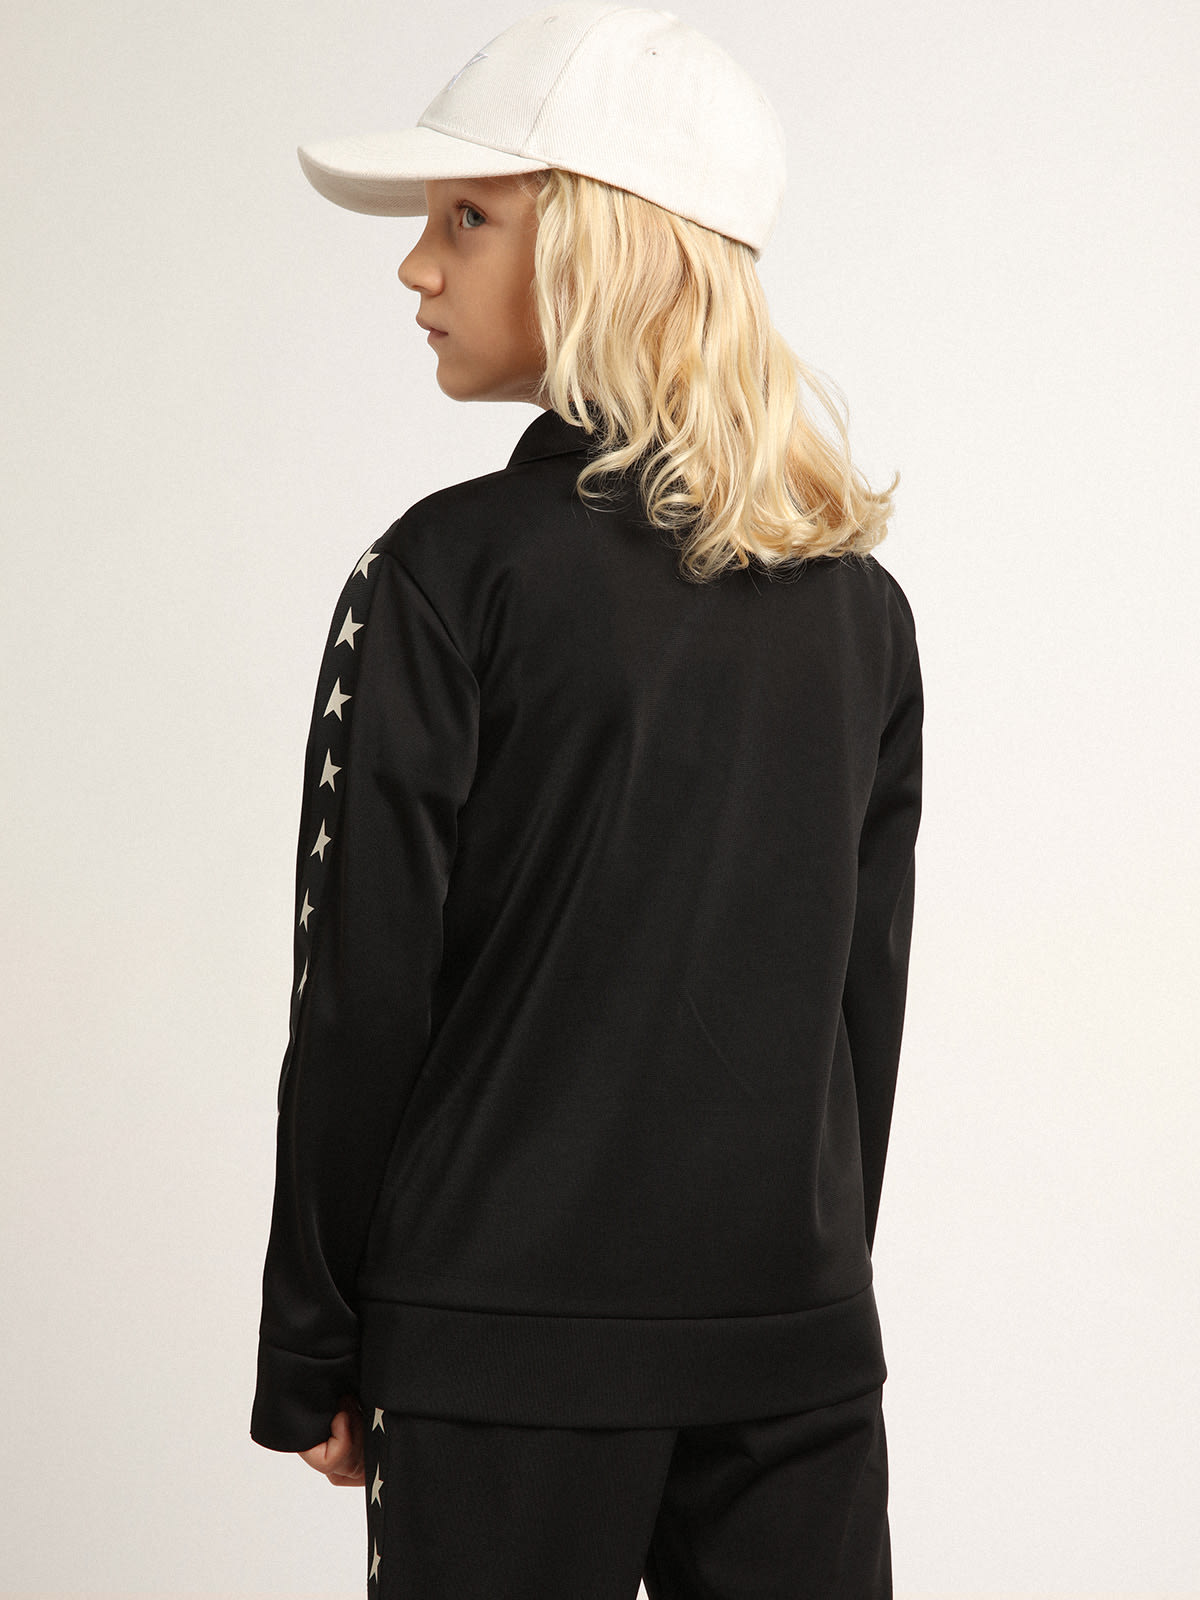 Golden Goose - Black zipped sweatshirt with contrasting white stars in 